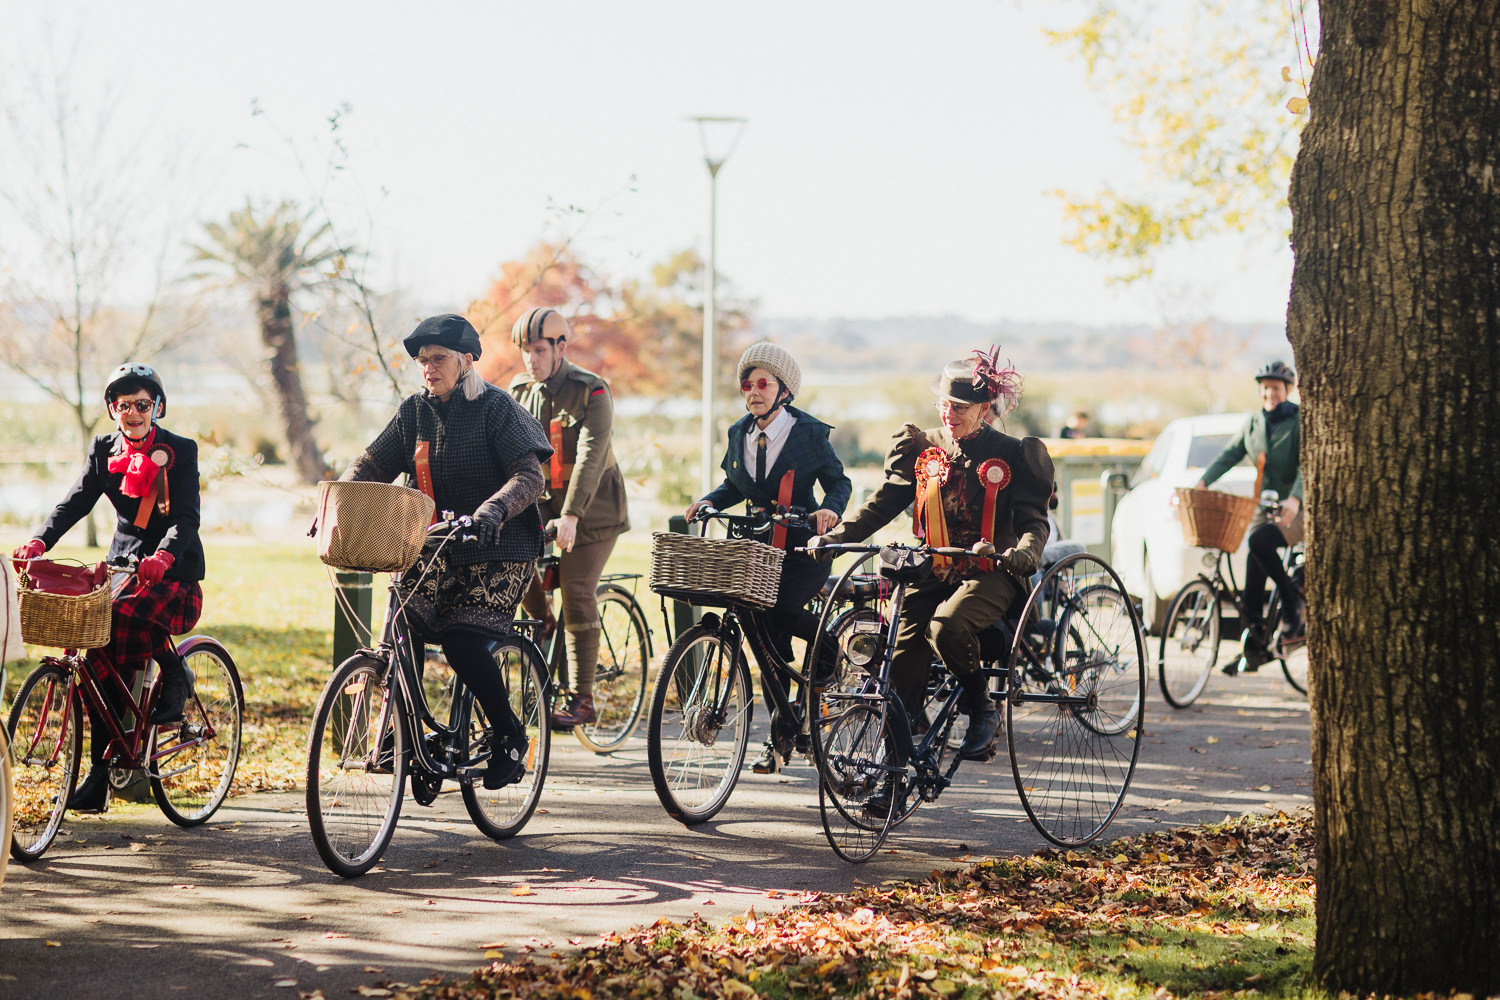 Ballarat Tweed and Ride - Bikes with vintage outfits